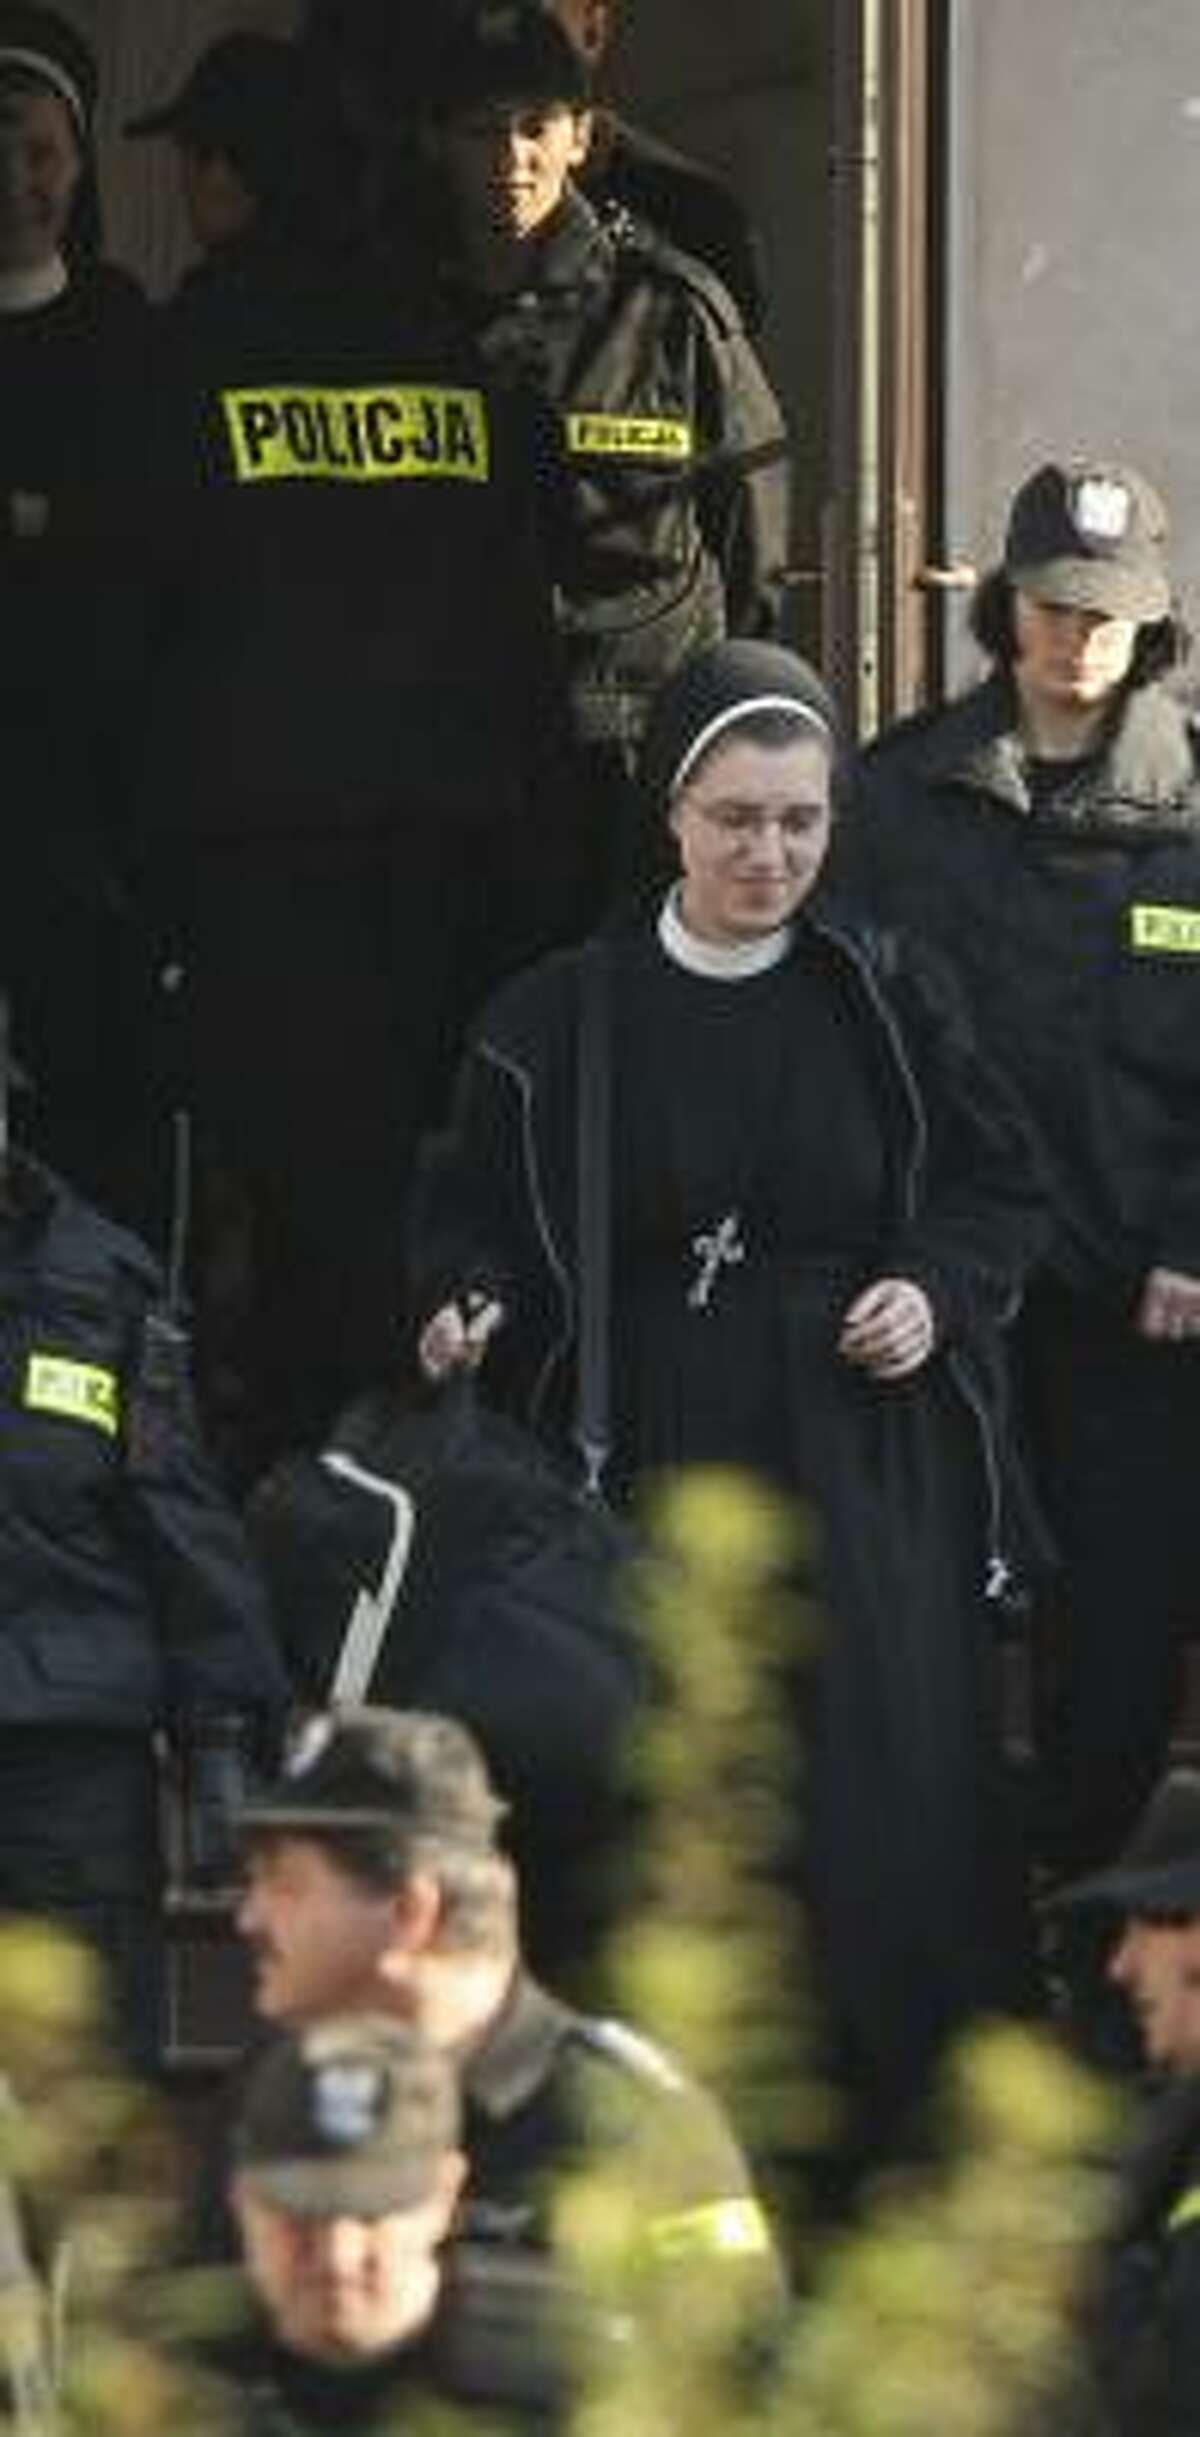 A former nun is escorted from the eastern Poland convent on Wednesday.